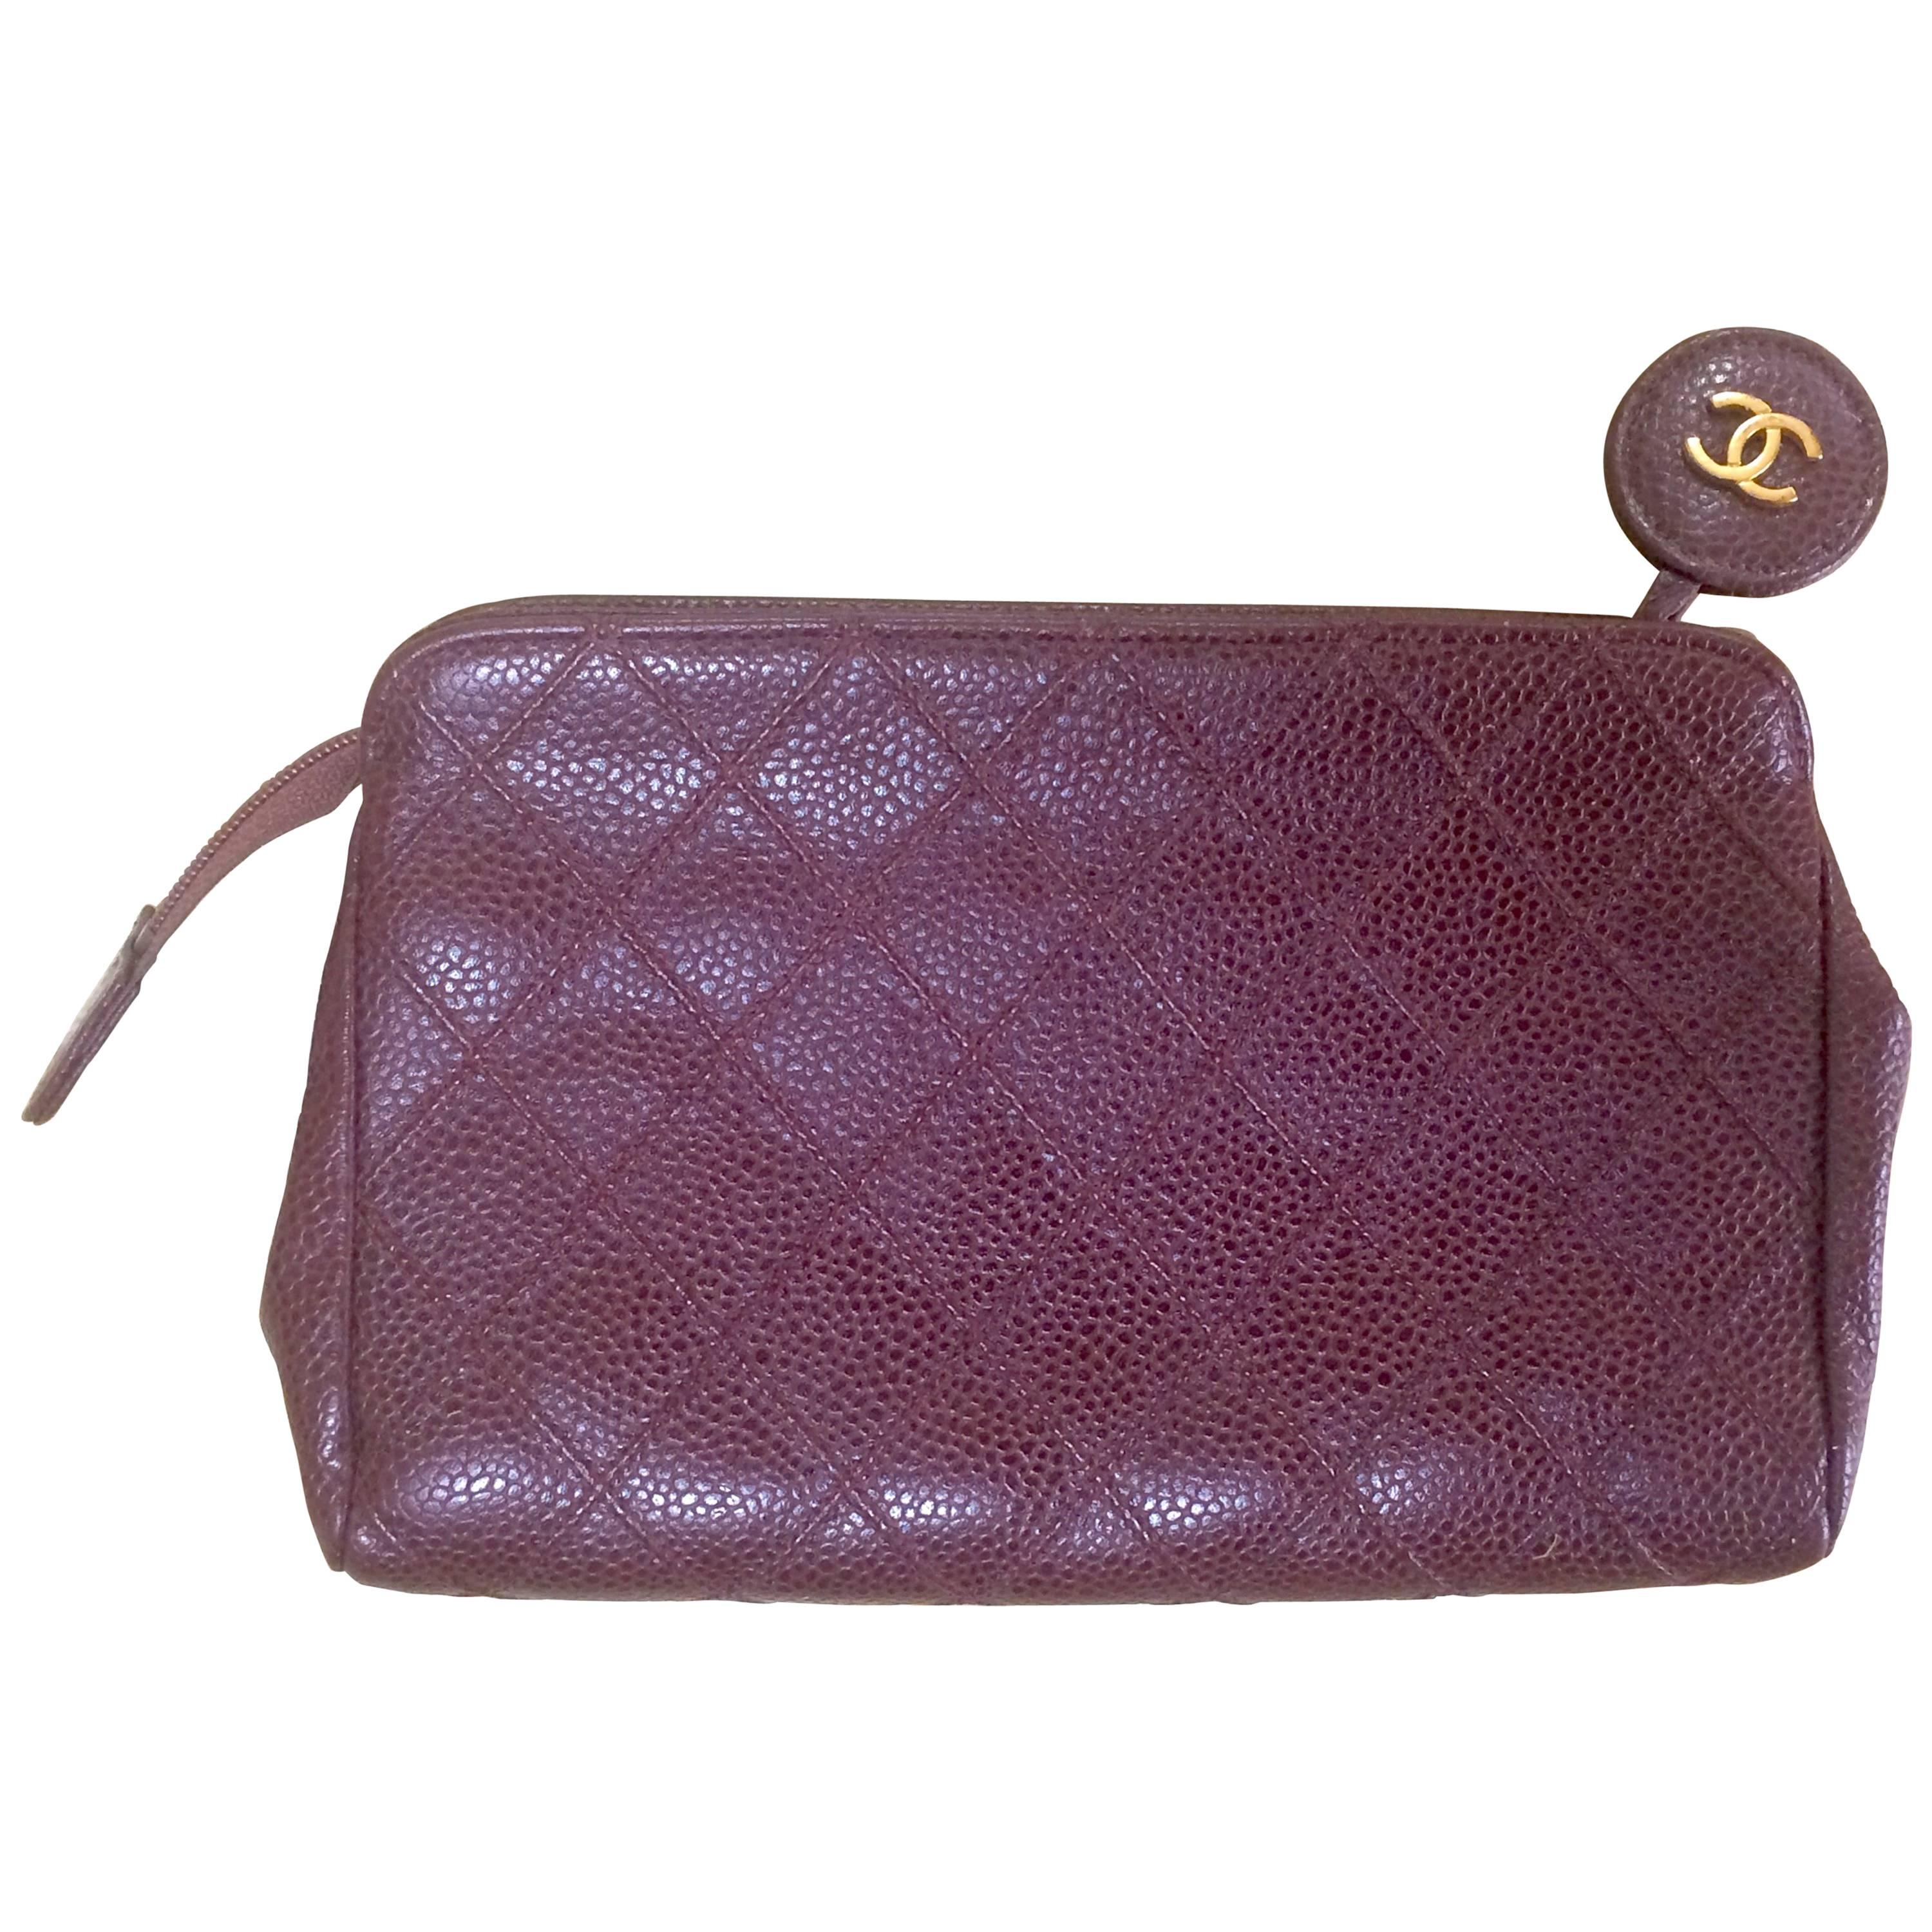 Vintage CHANEL wine brown caviar leather cosmetic, toiletries, makeup pouch. For Sale